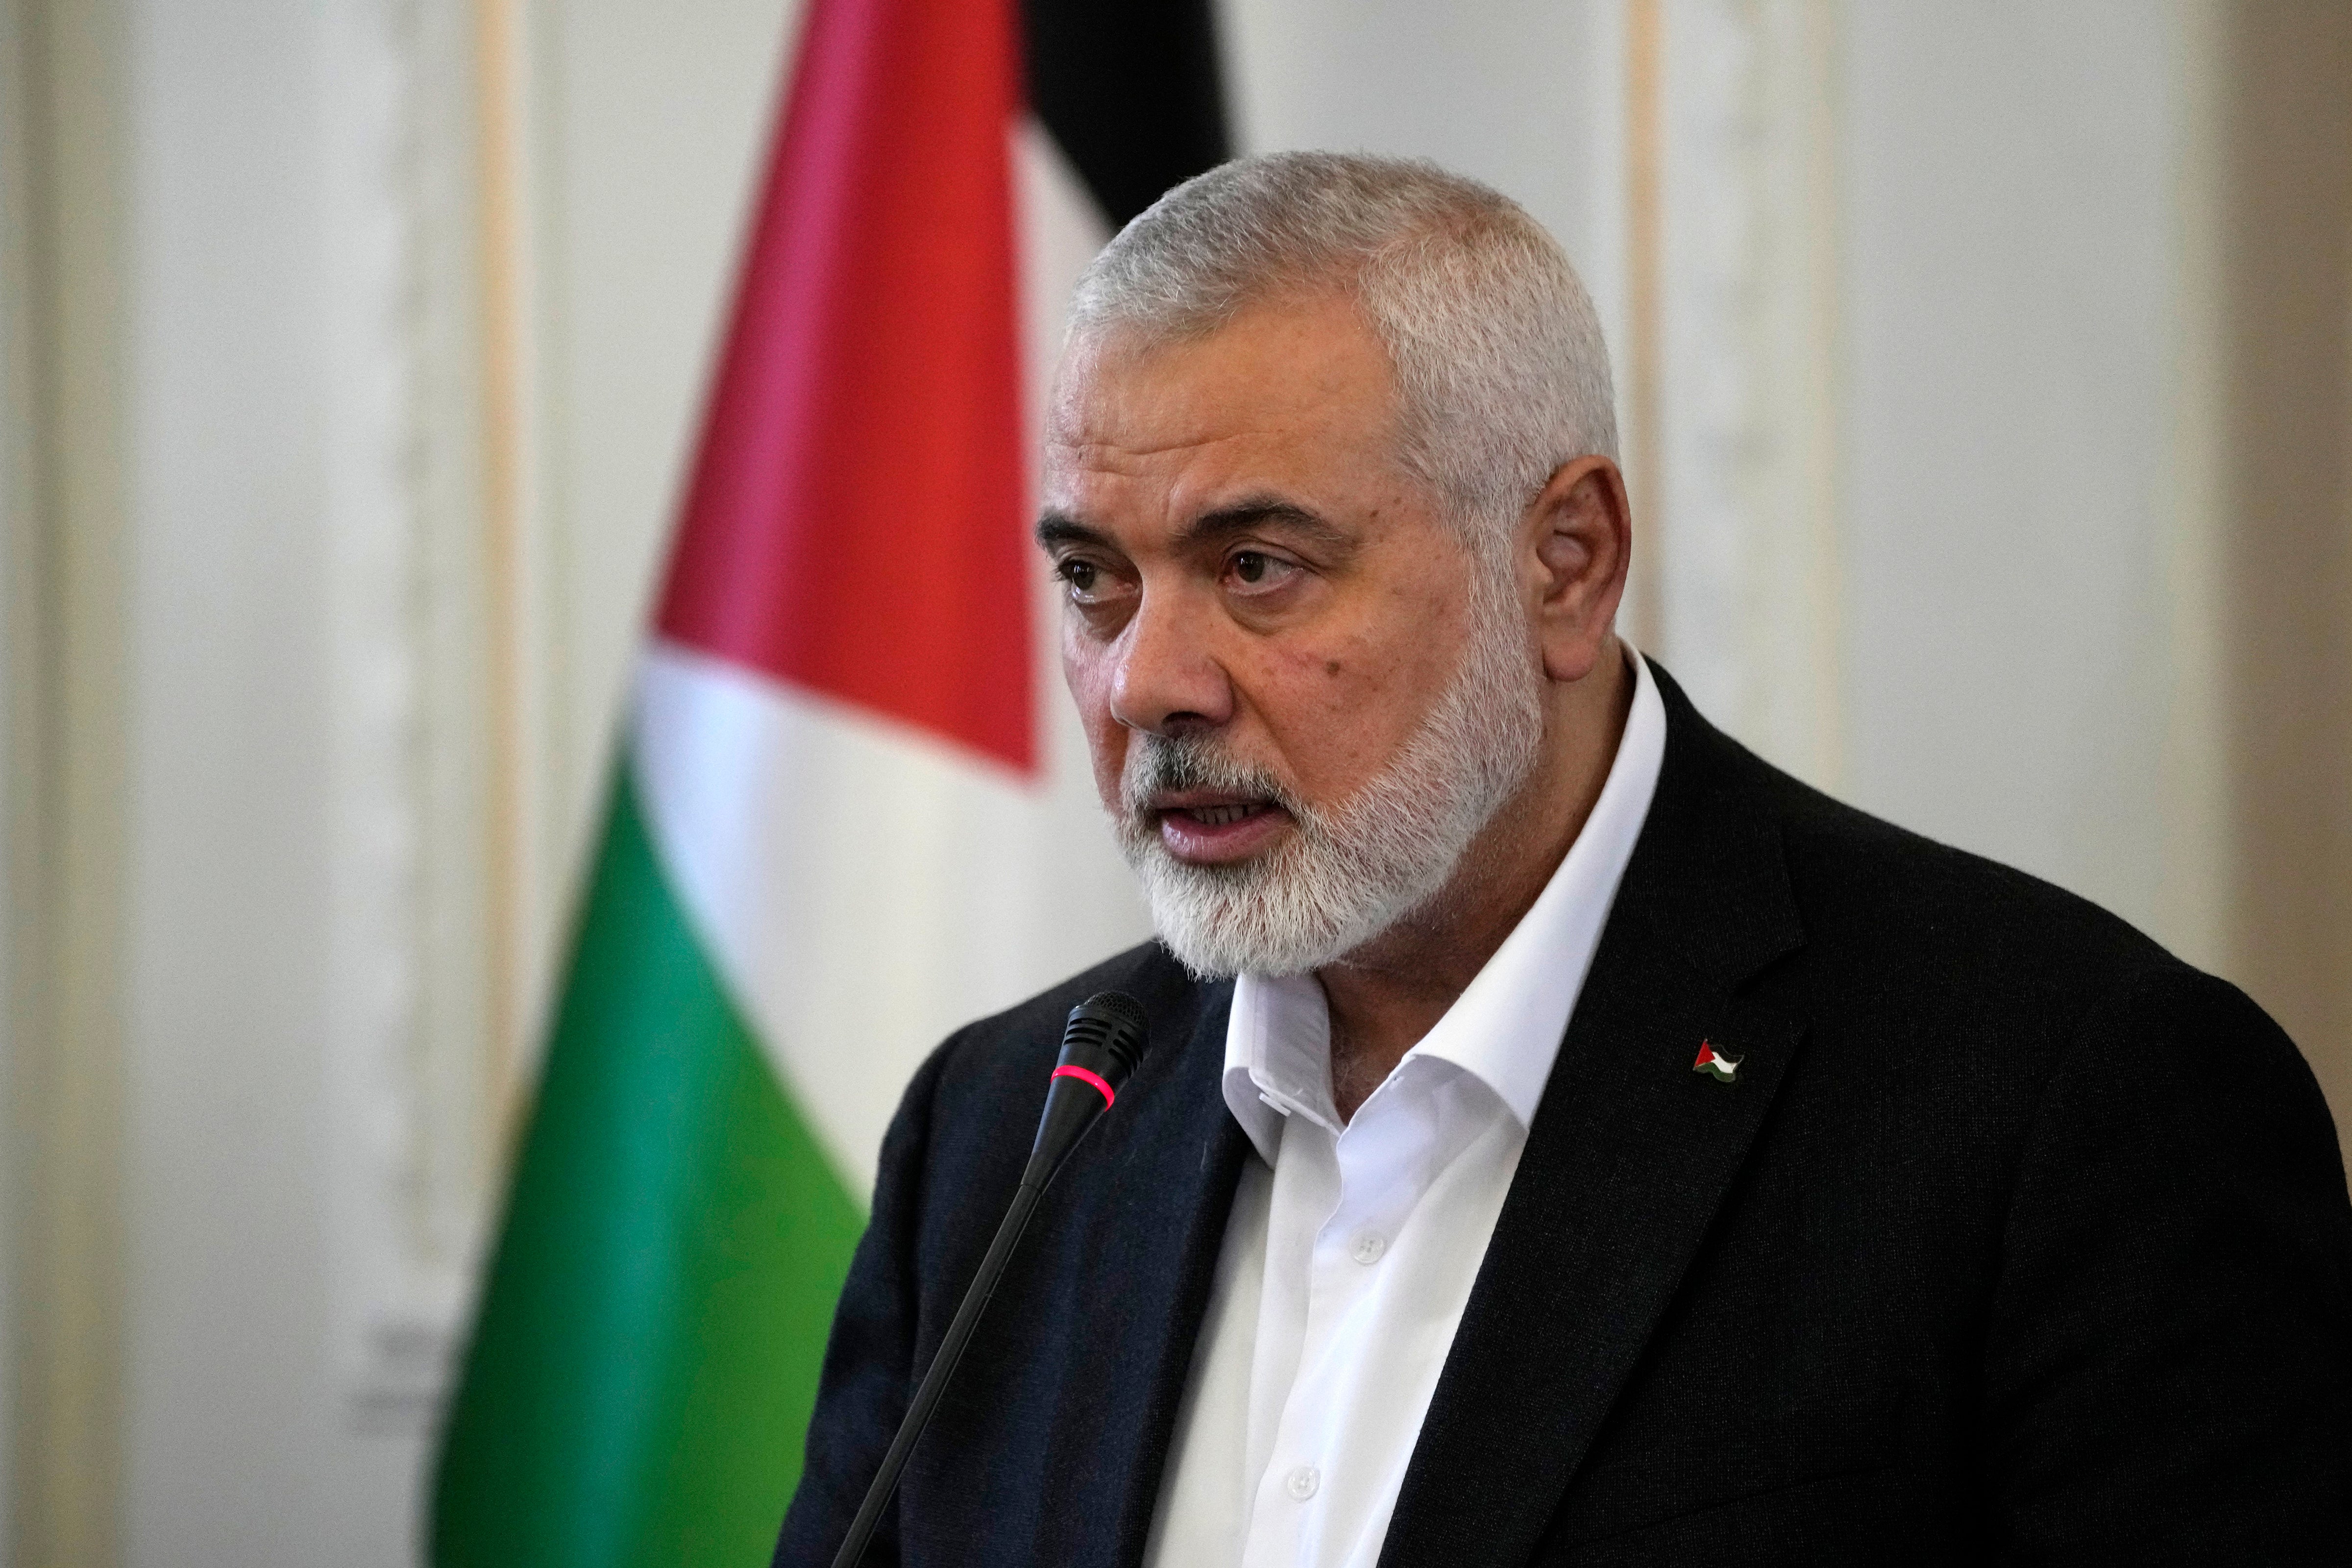 The airstrike killed the sister of Hamas chief Ismail Haniyeh and dozens of other Palestinians